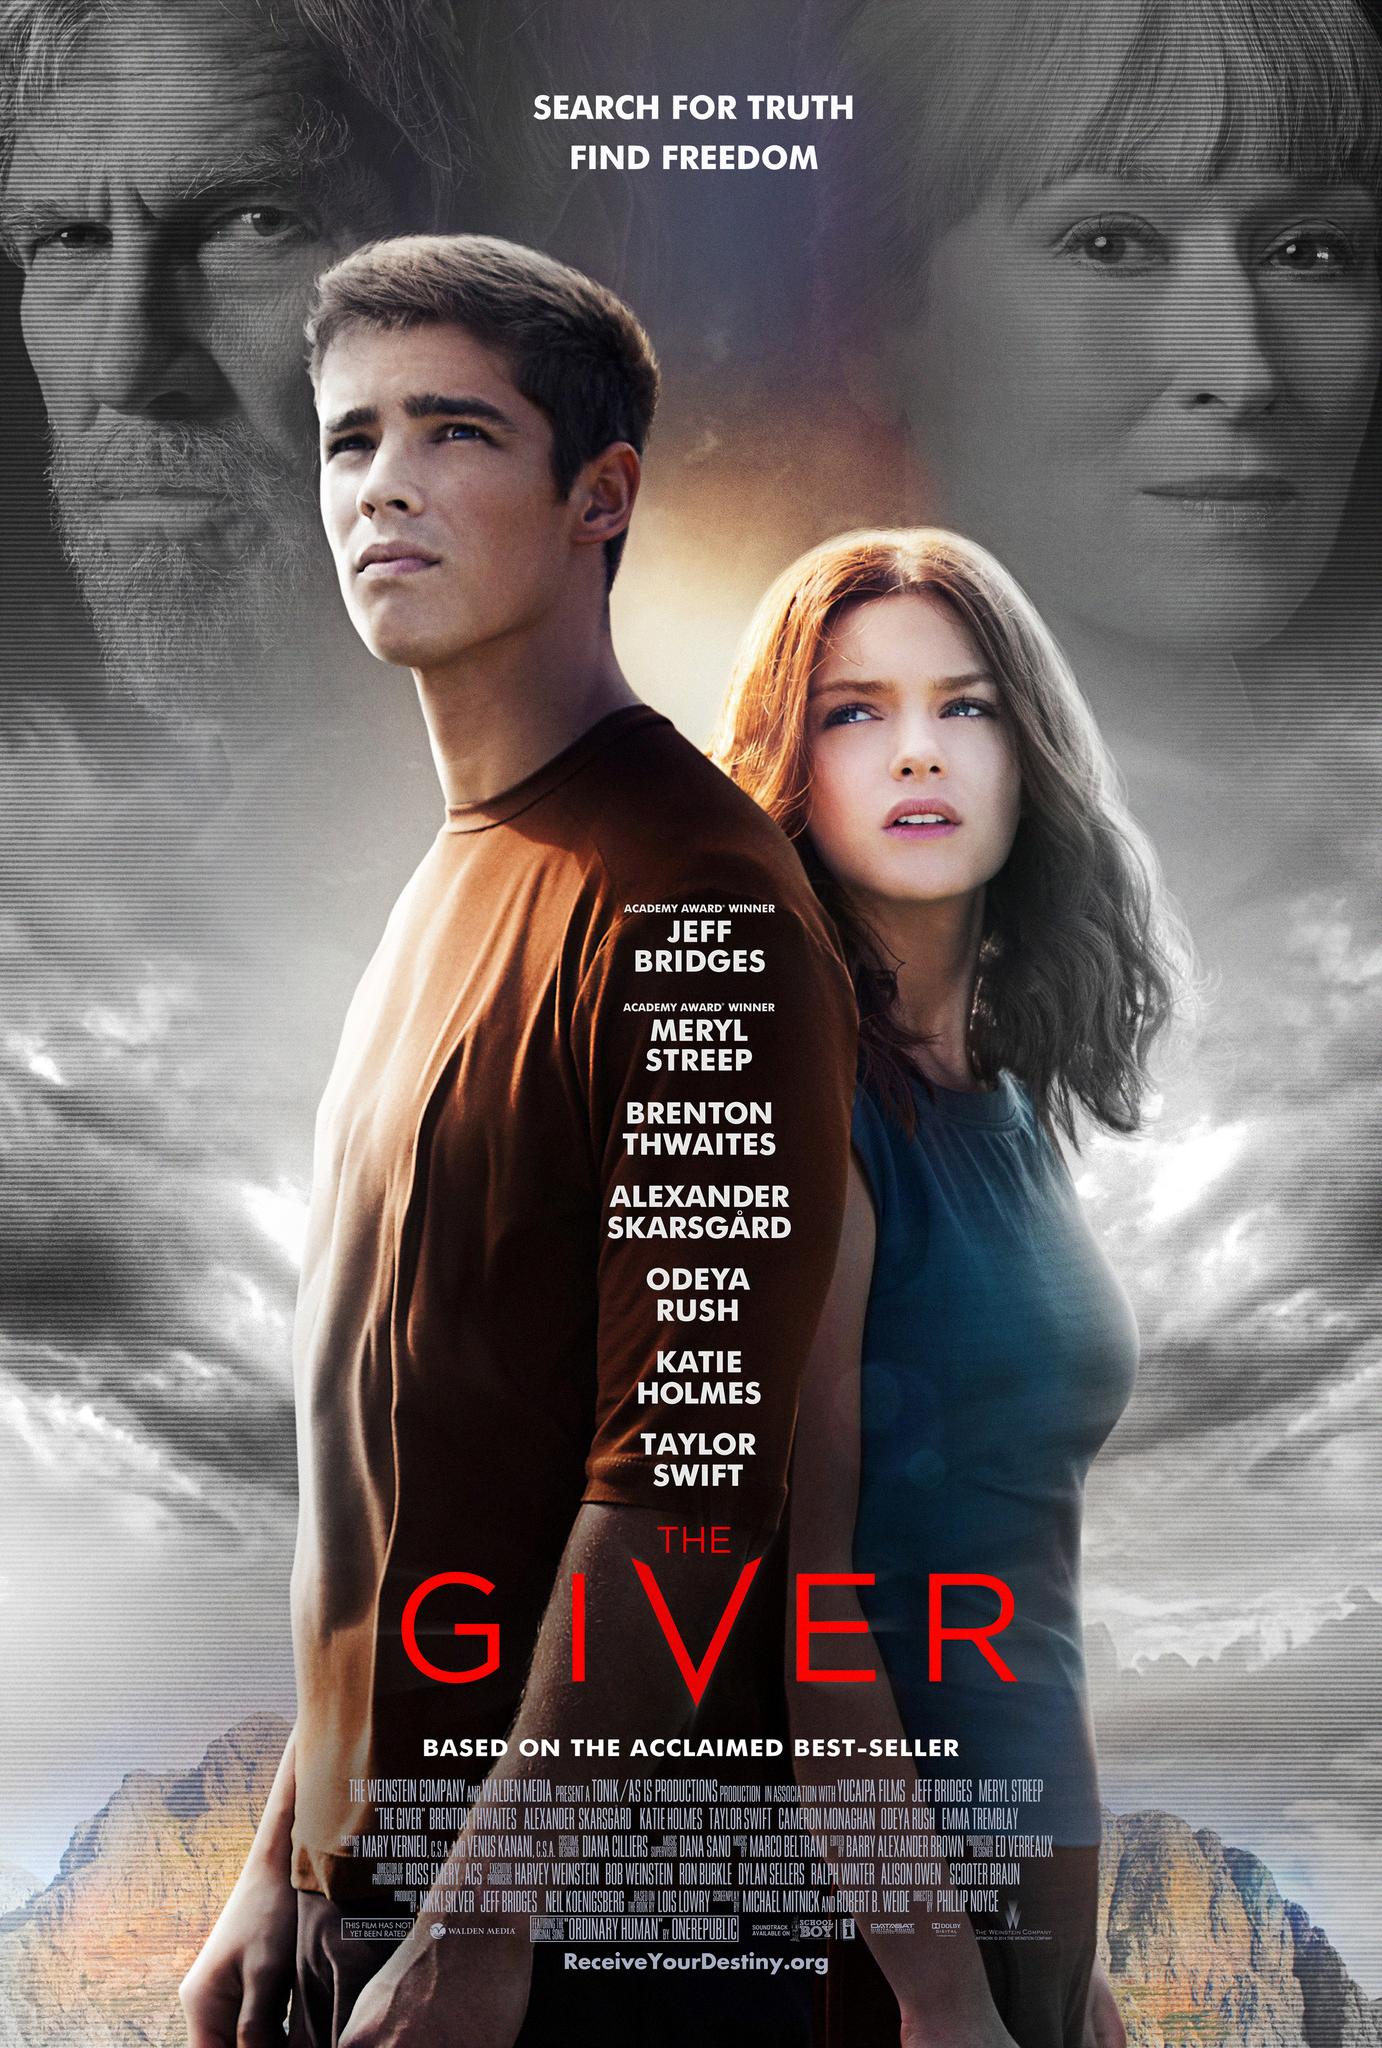 does jonas die in the giver